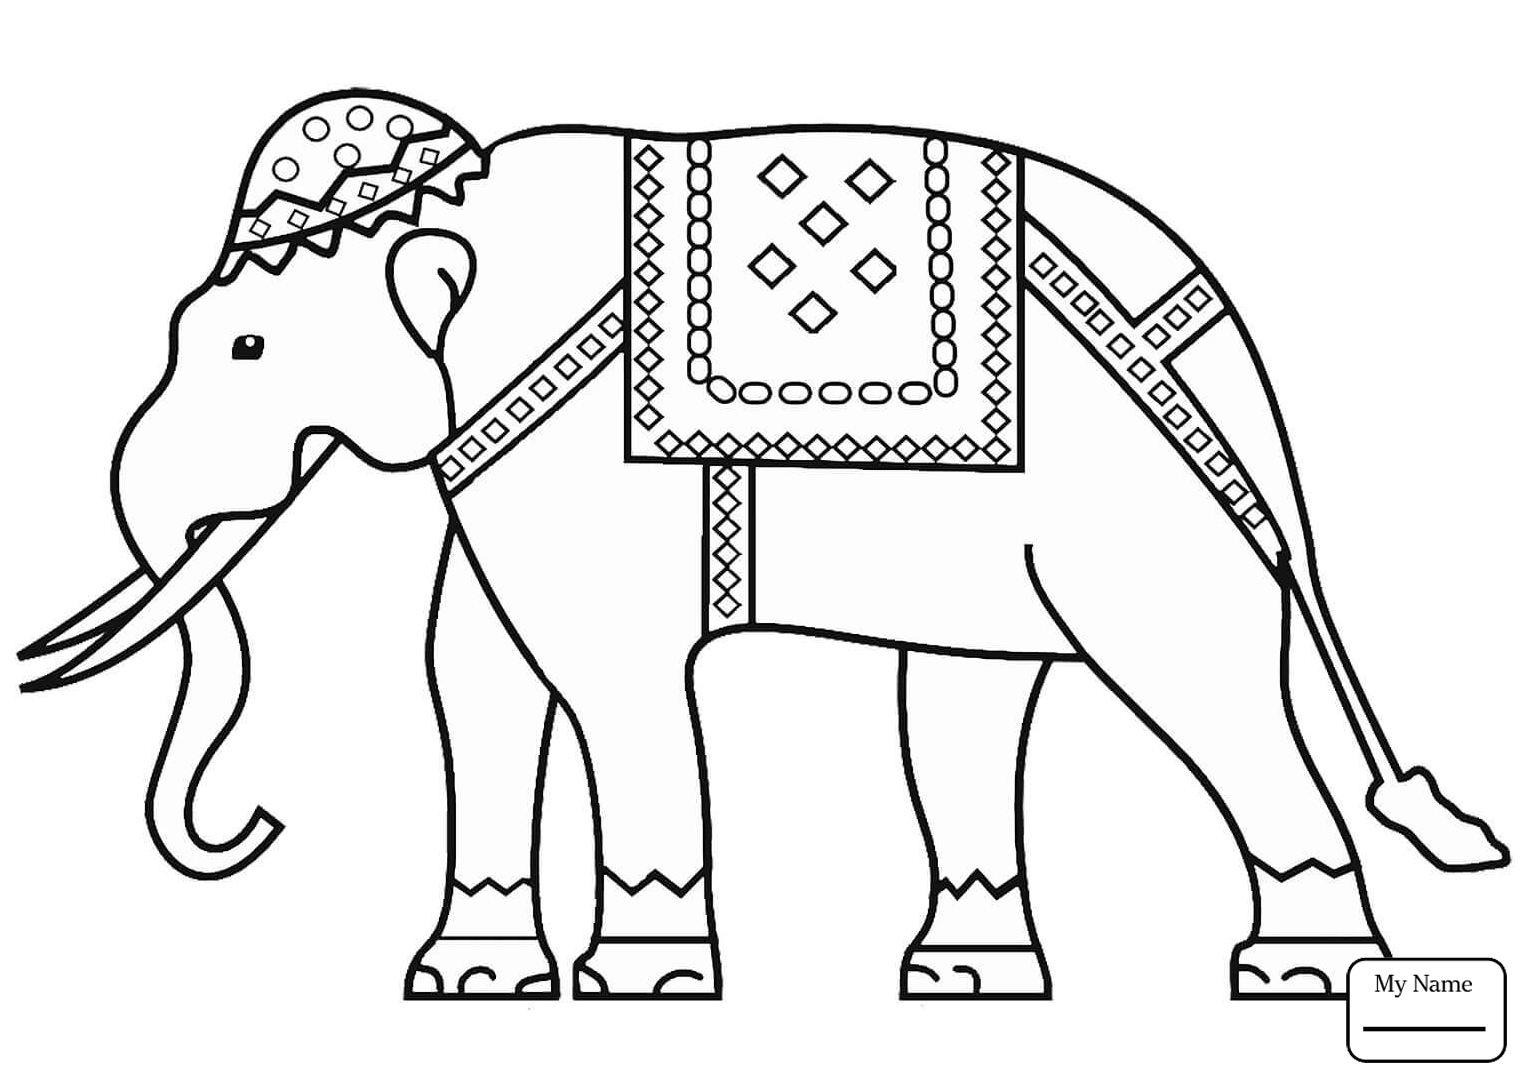 Saraswati Coloring Pages India Coloring Pages For Kids Printable Coloring Page For Kids